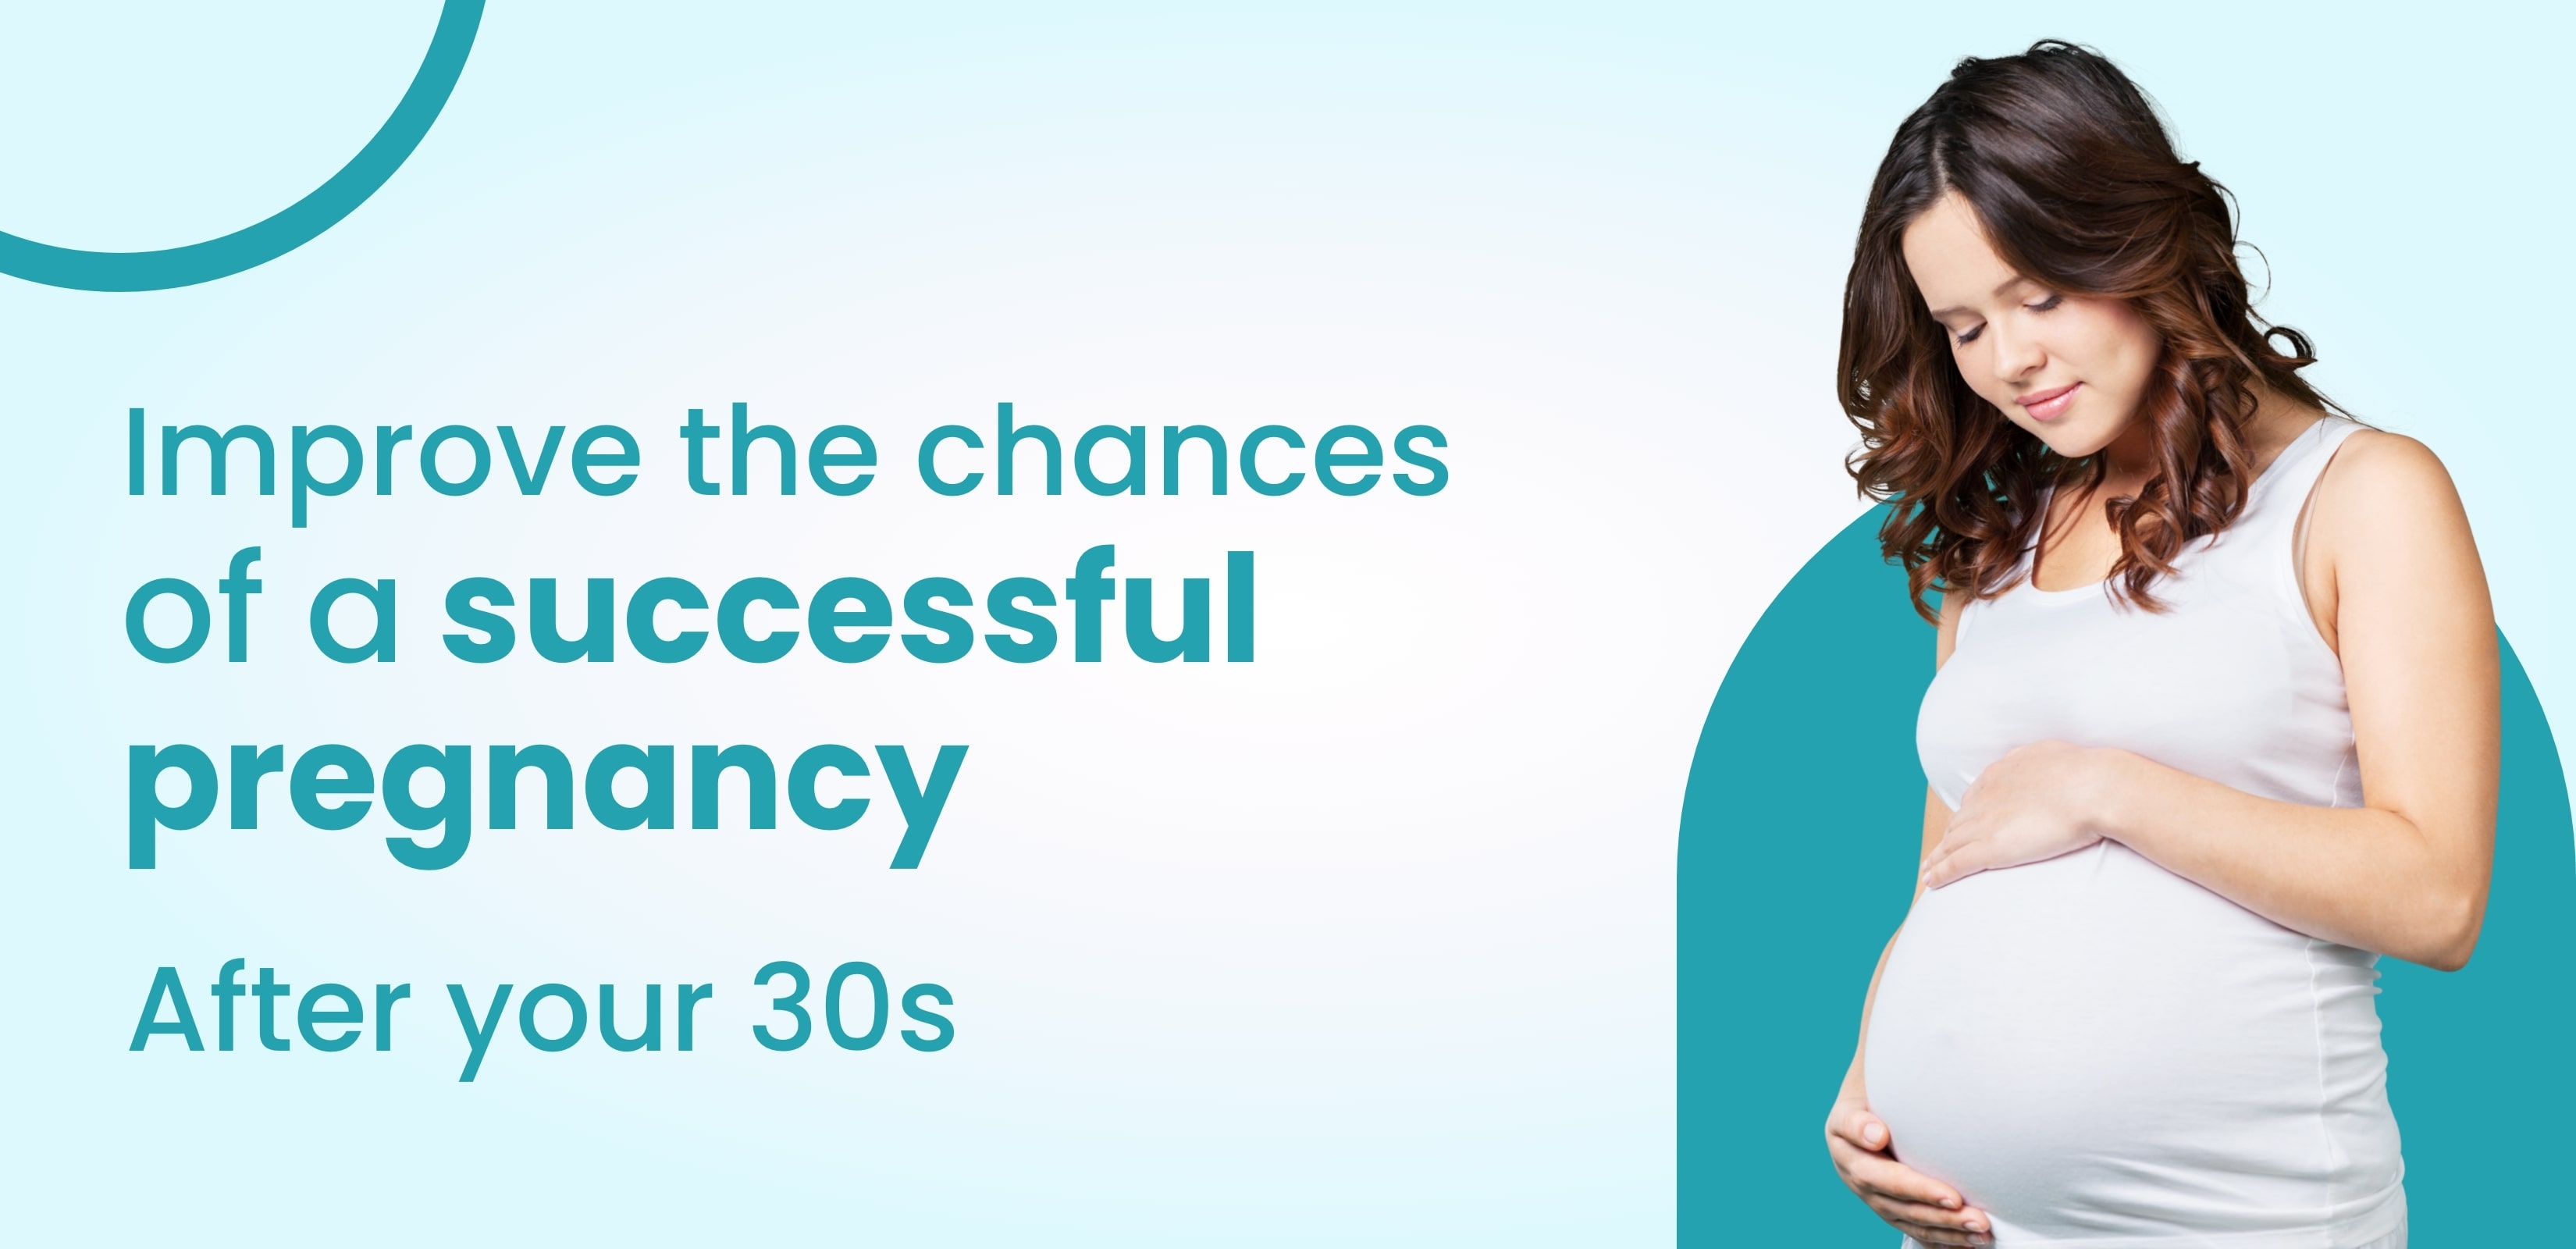 How to improve the chances of a successful pregnancy after your 30s?